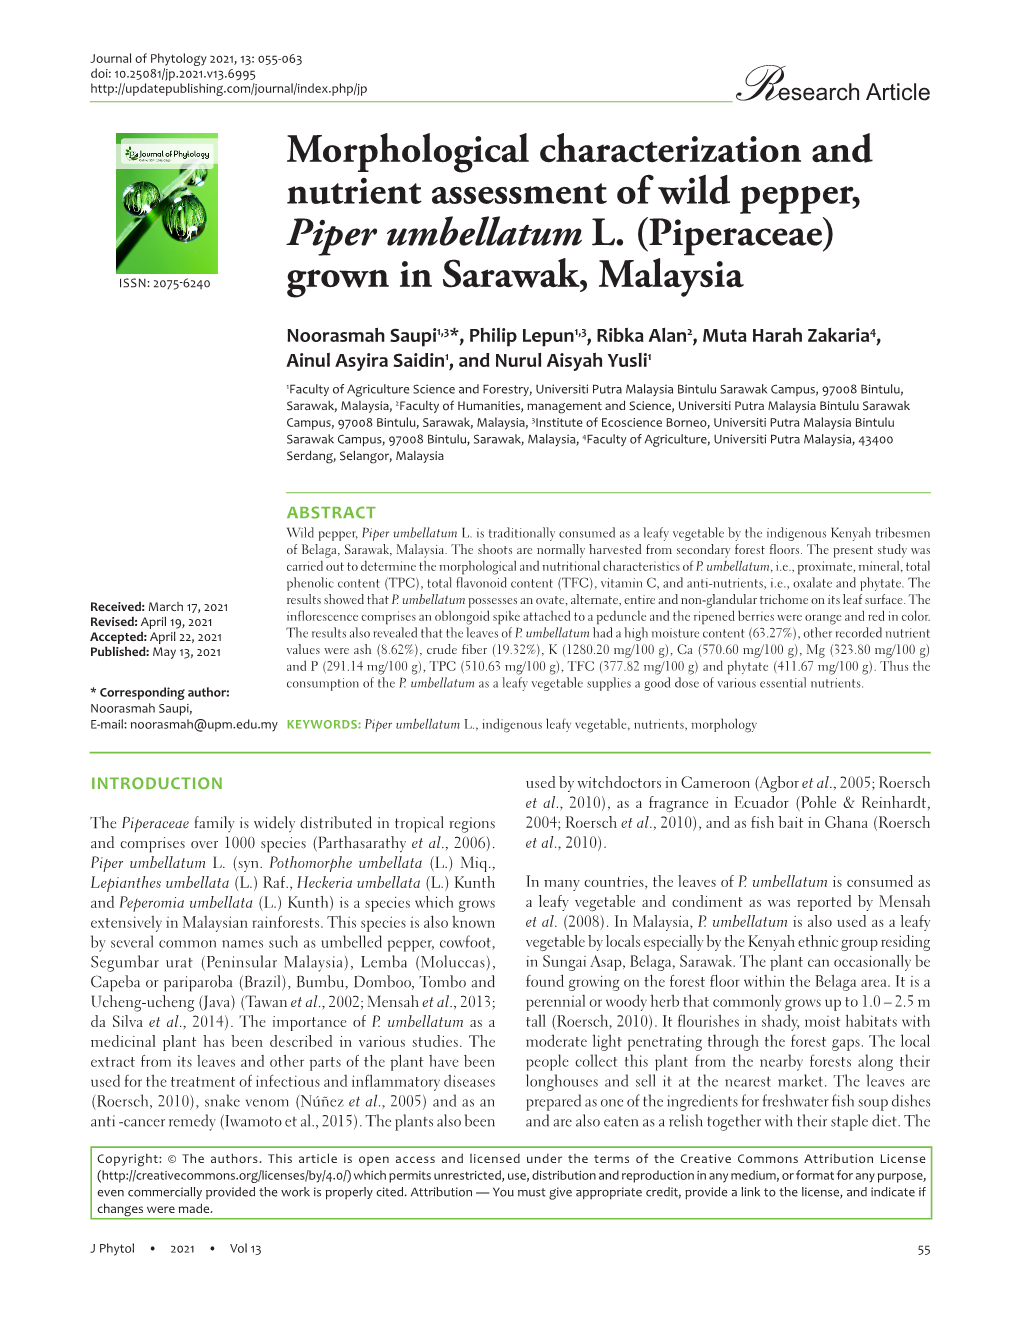 Morphological Characterization and Nutrient Assessment of Wild Pepper, Piper Umbellatum L. (Piperaceae) Grown in Sarawak, Malays